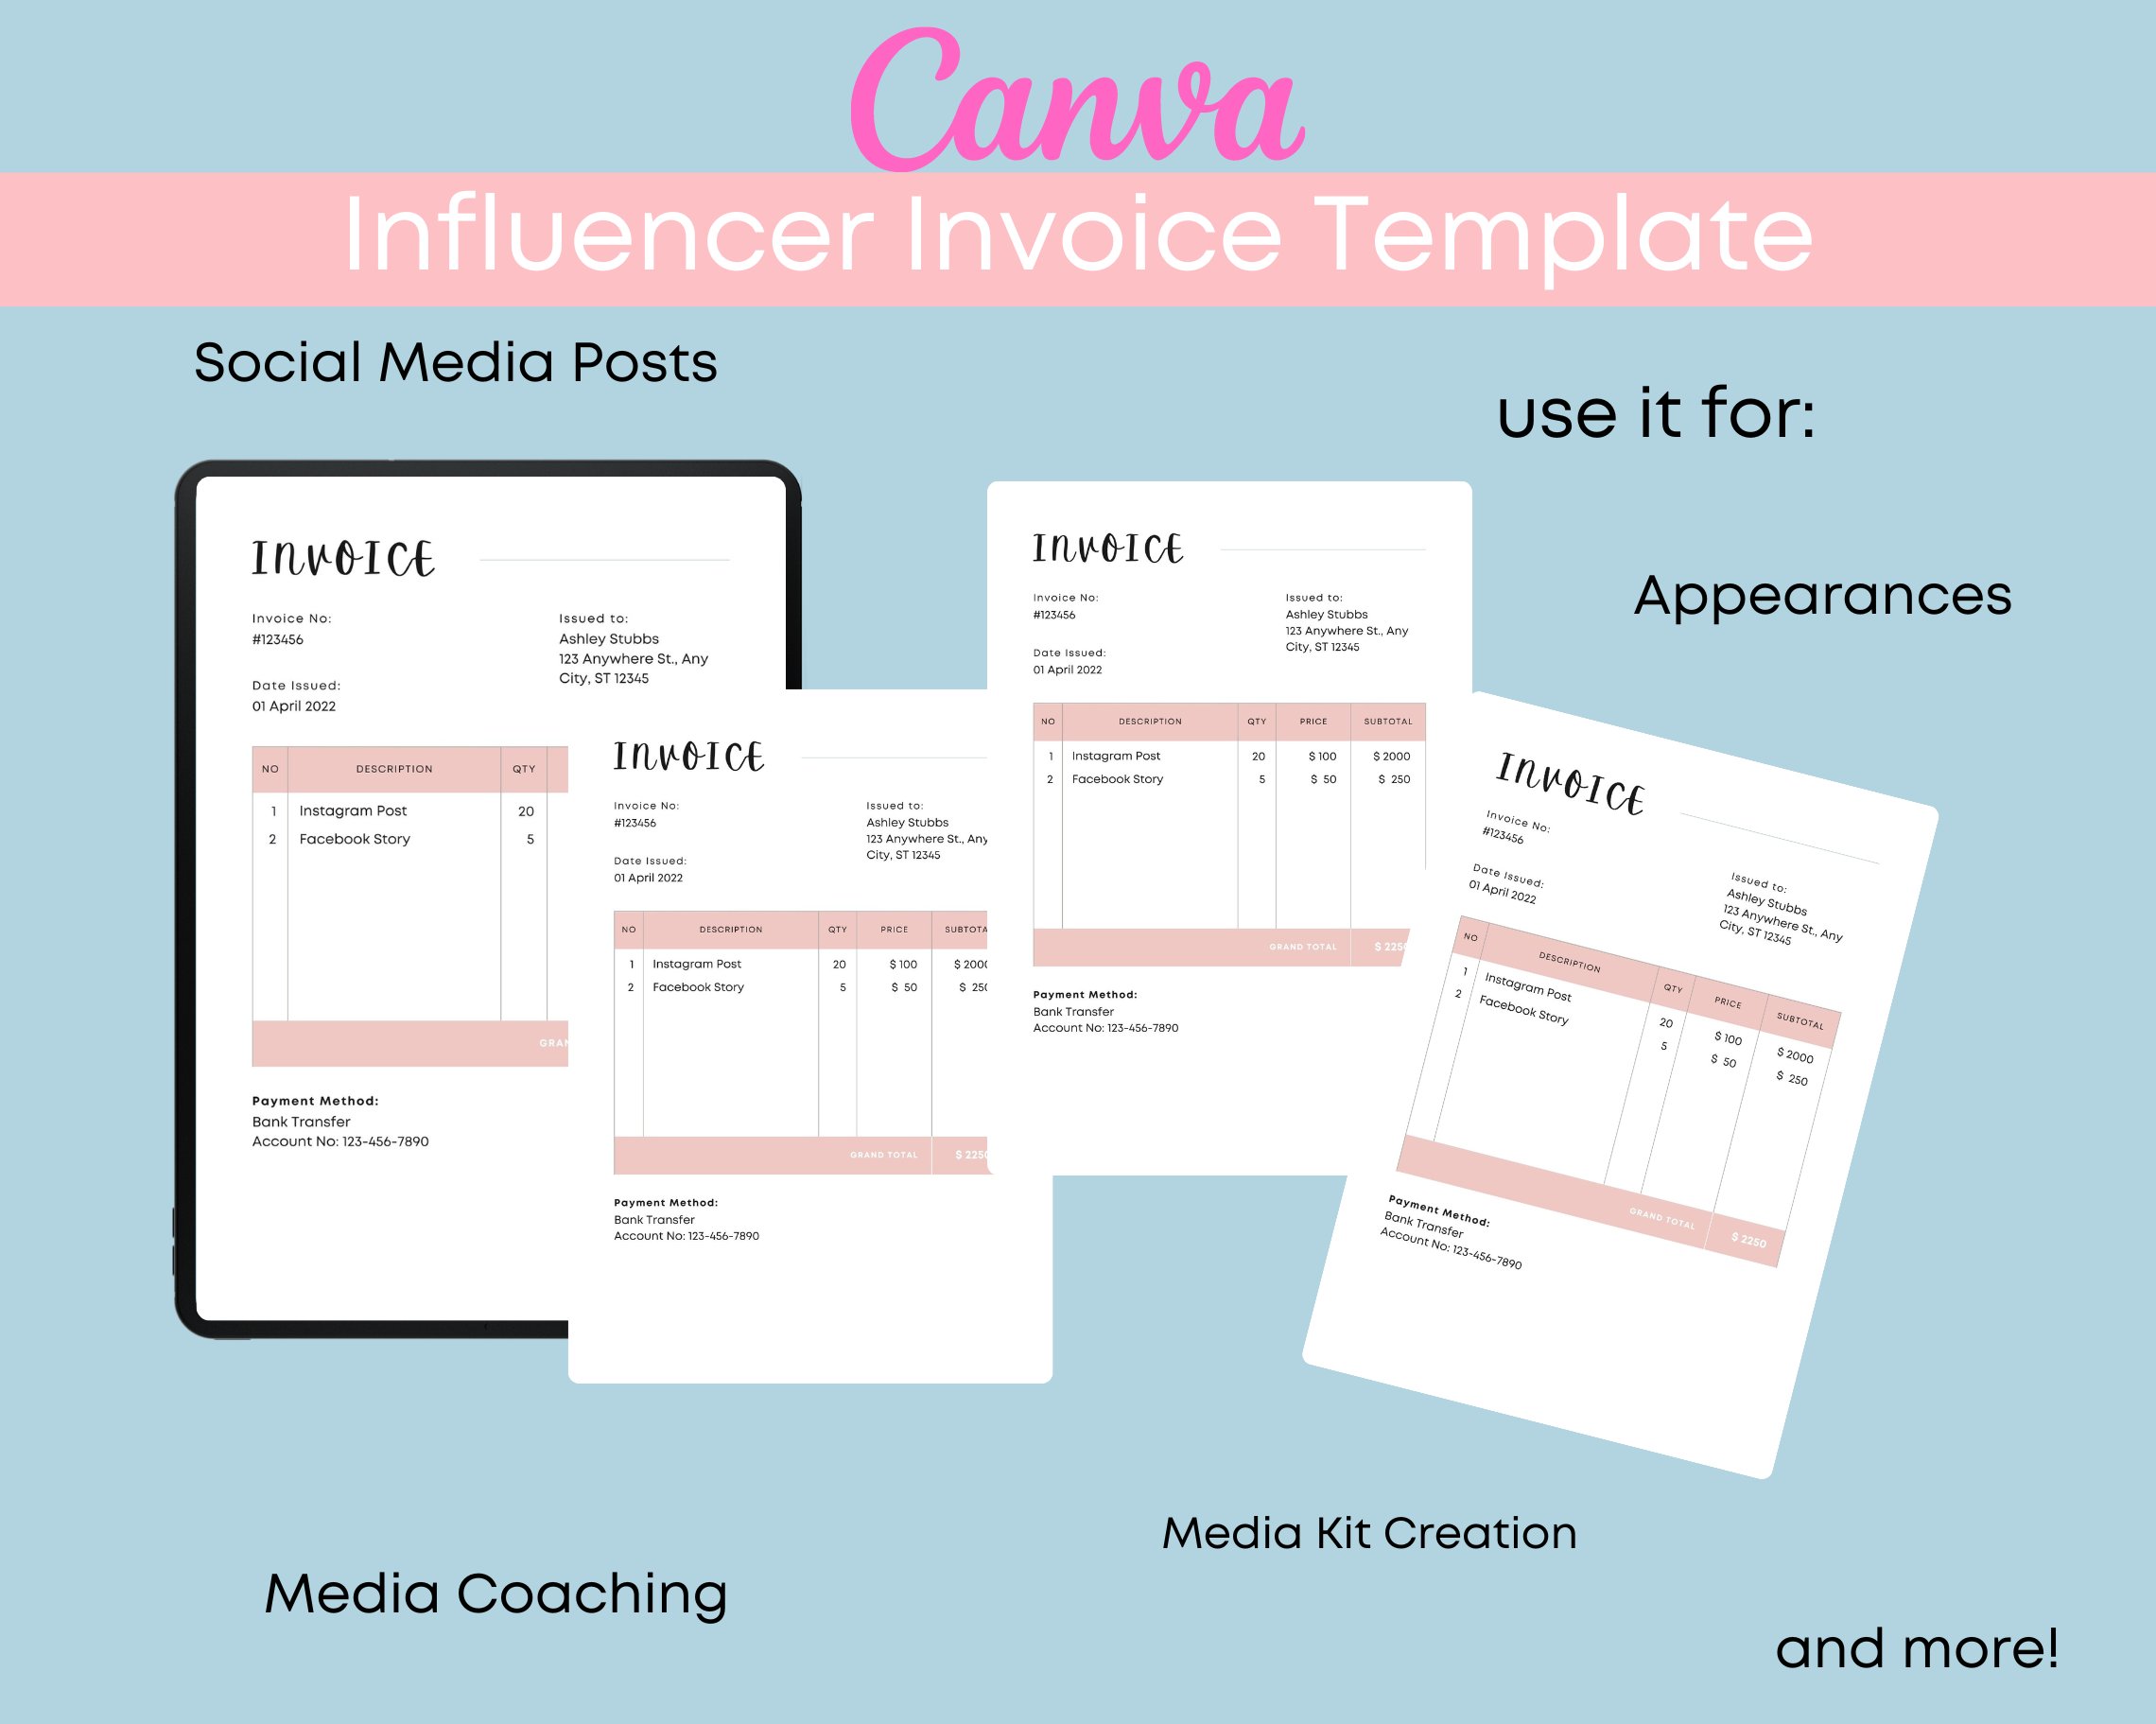 Invoice Template -Editable in Canva preview image.